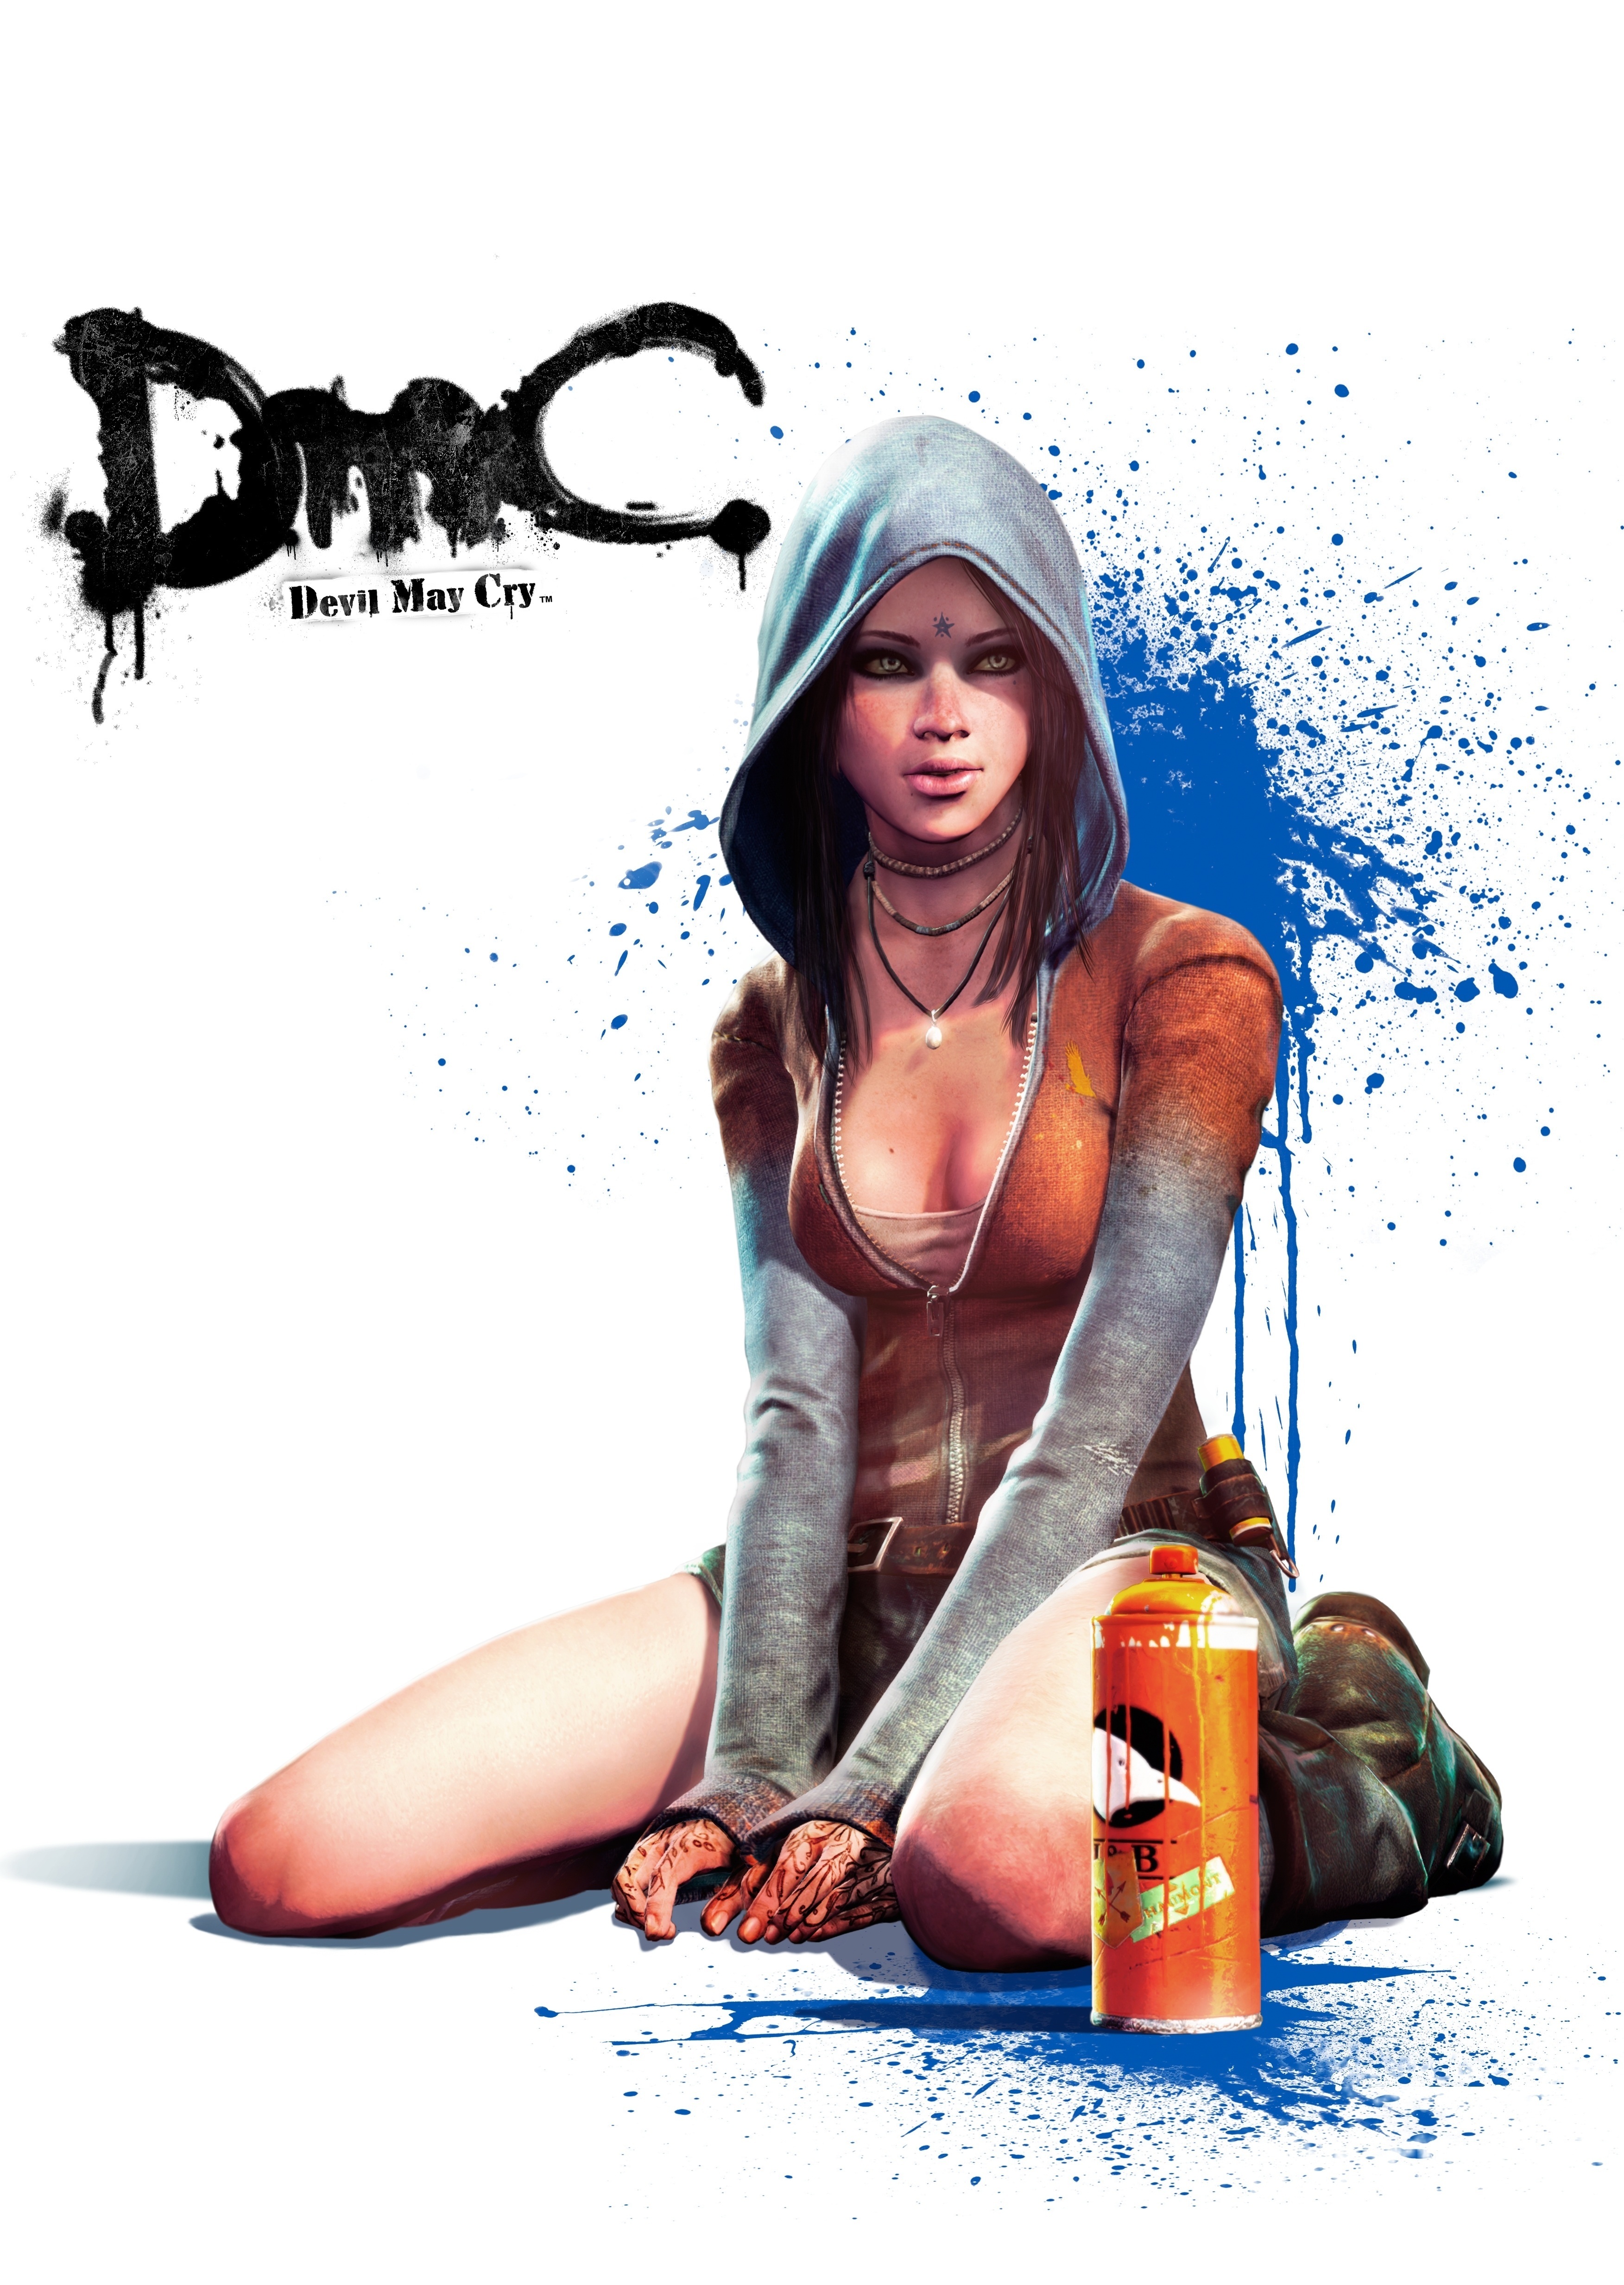 17603 download wallpaper games, devil may cry, white screensavers and pictures for free